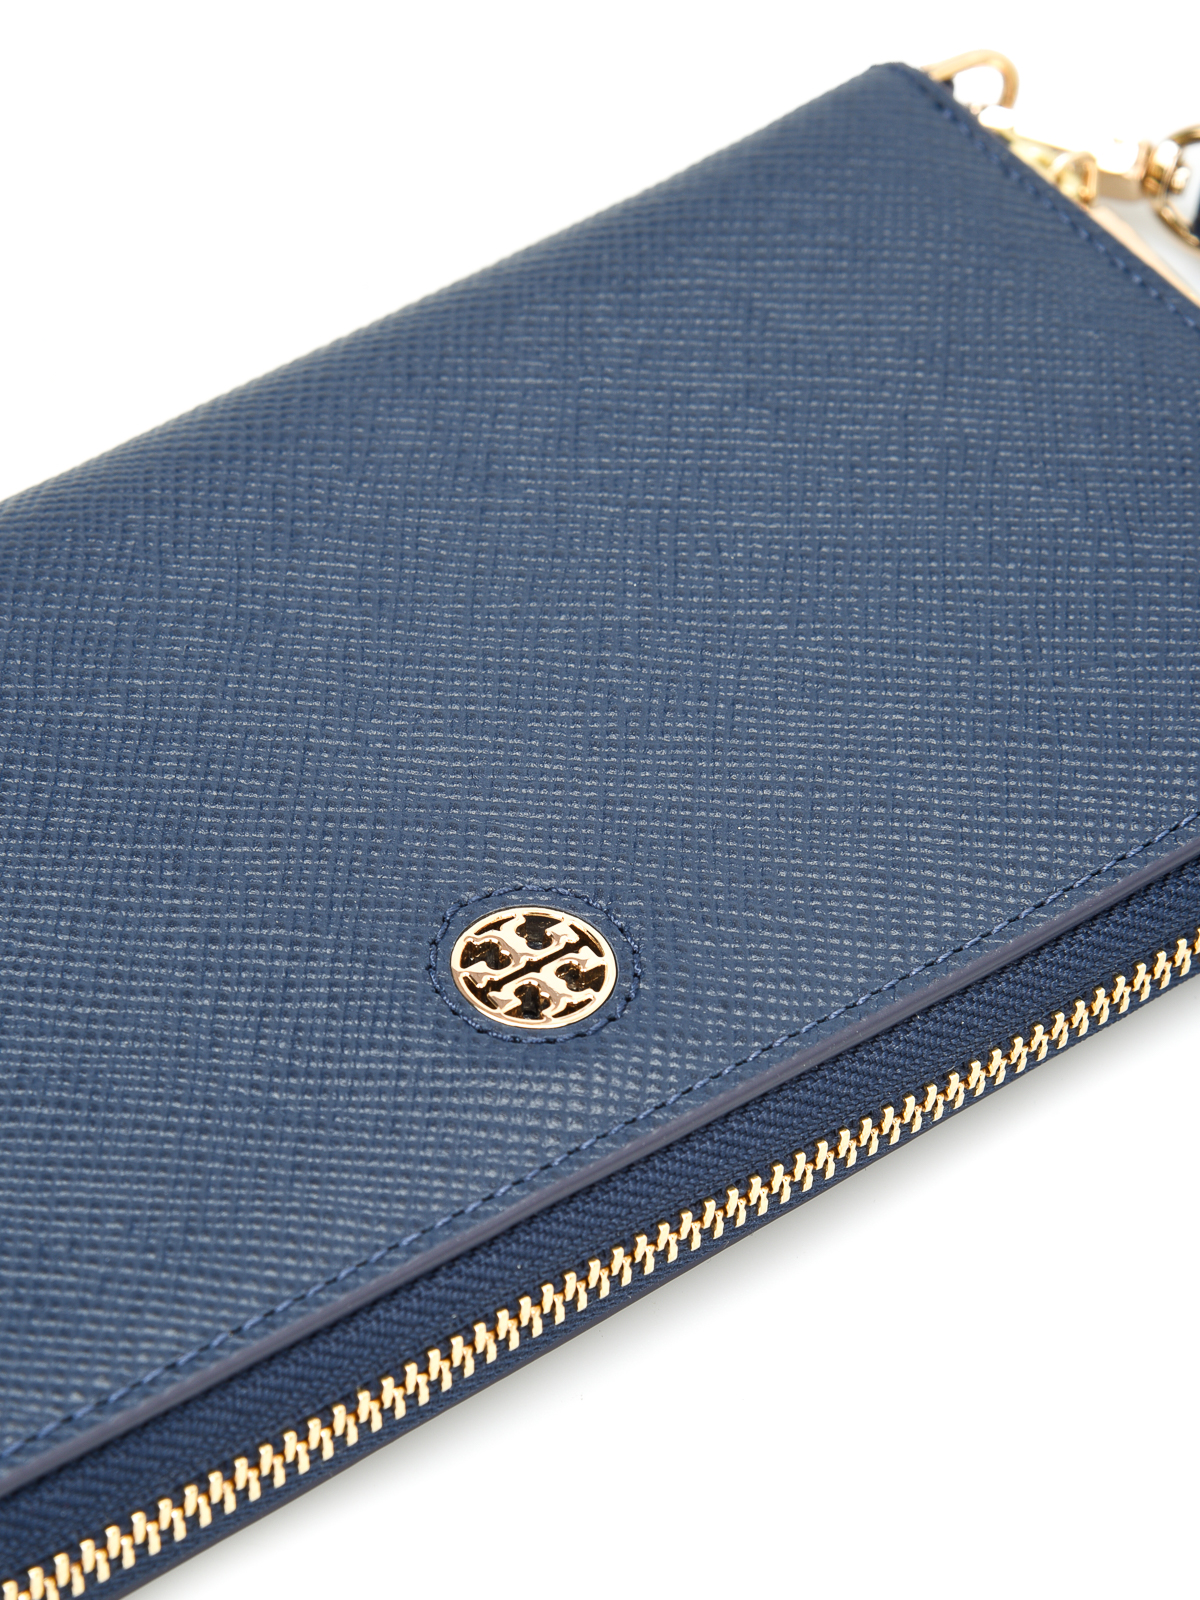 Wallets & purses Tory Burch - Perry zip continental wallet - 29998403